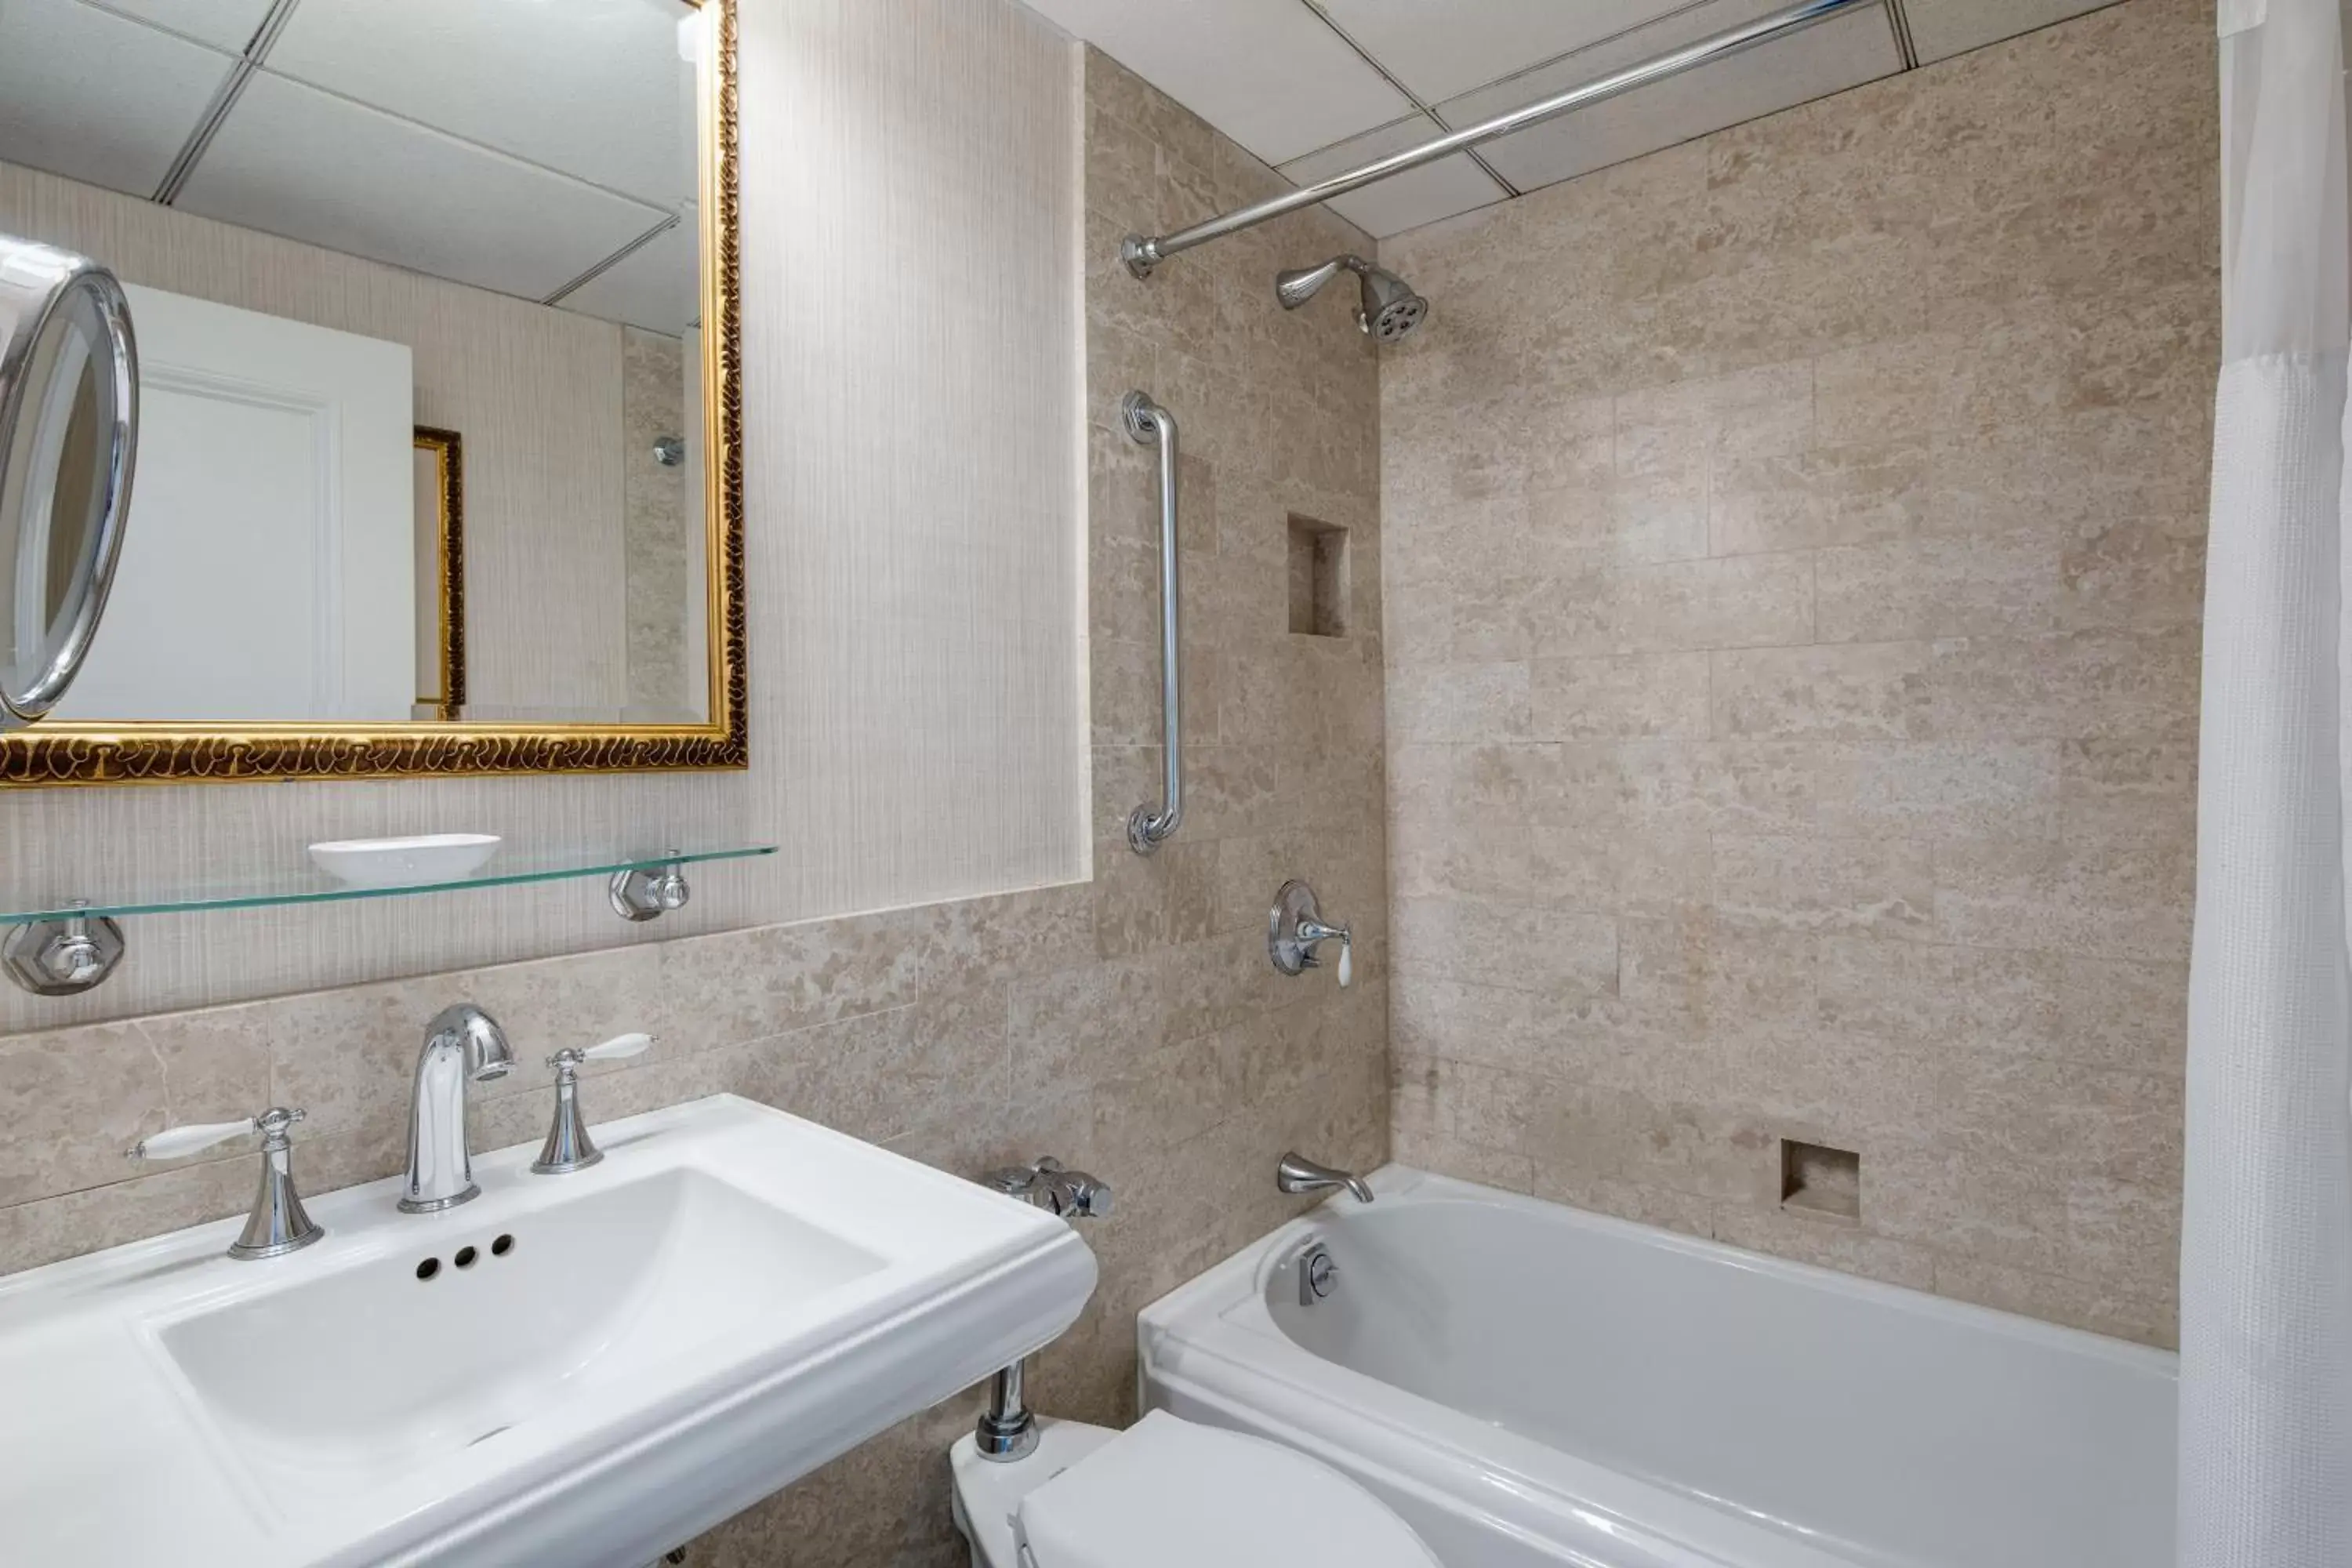 Bathroom in Amway Grand Plaza Hotel, Curio Collection by Hilton